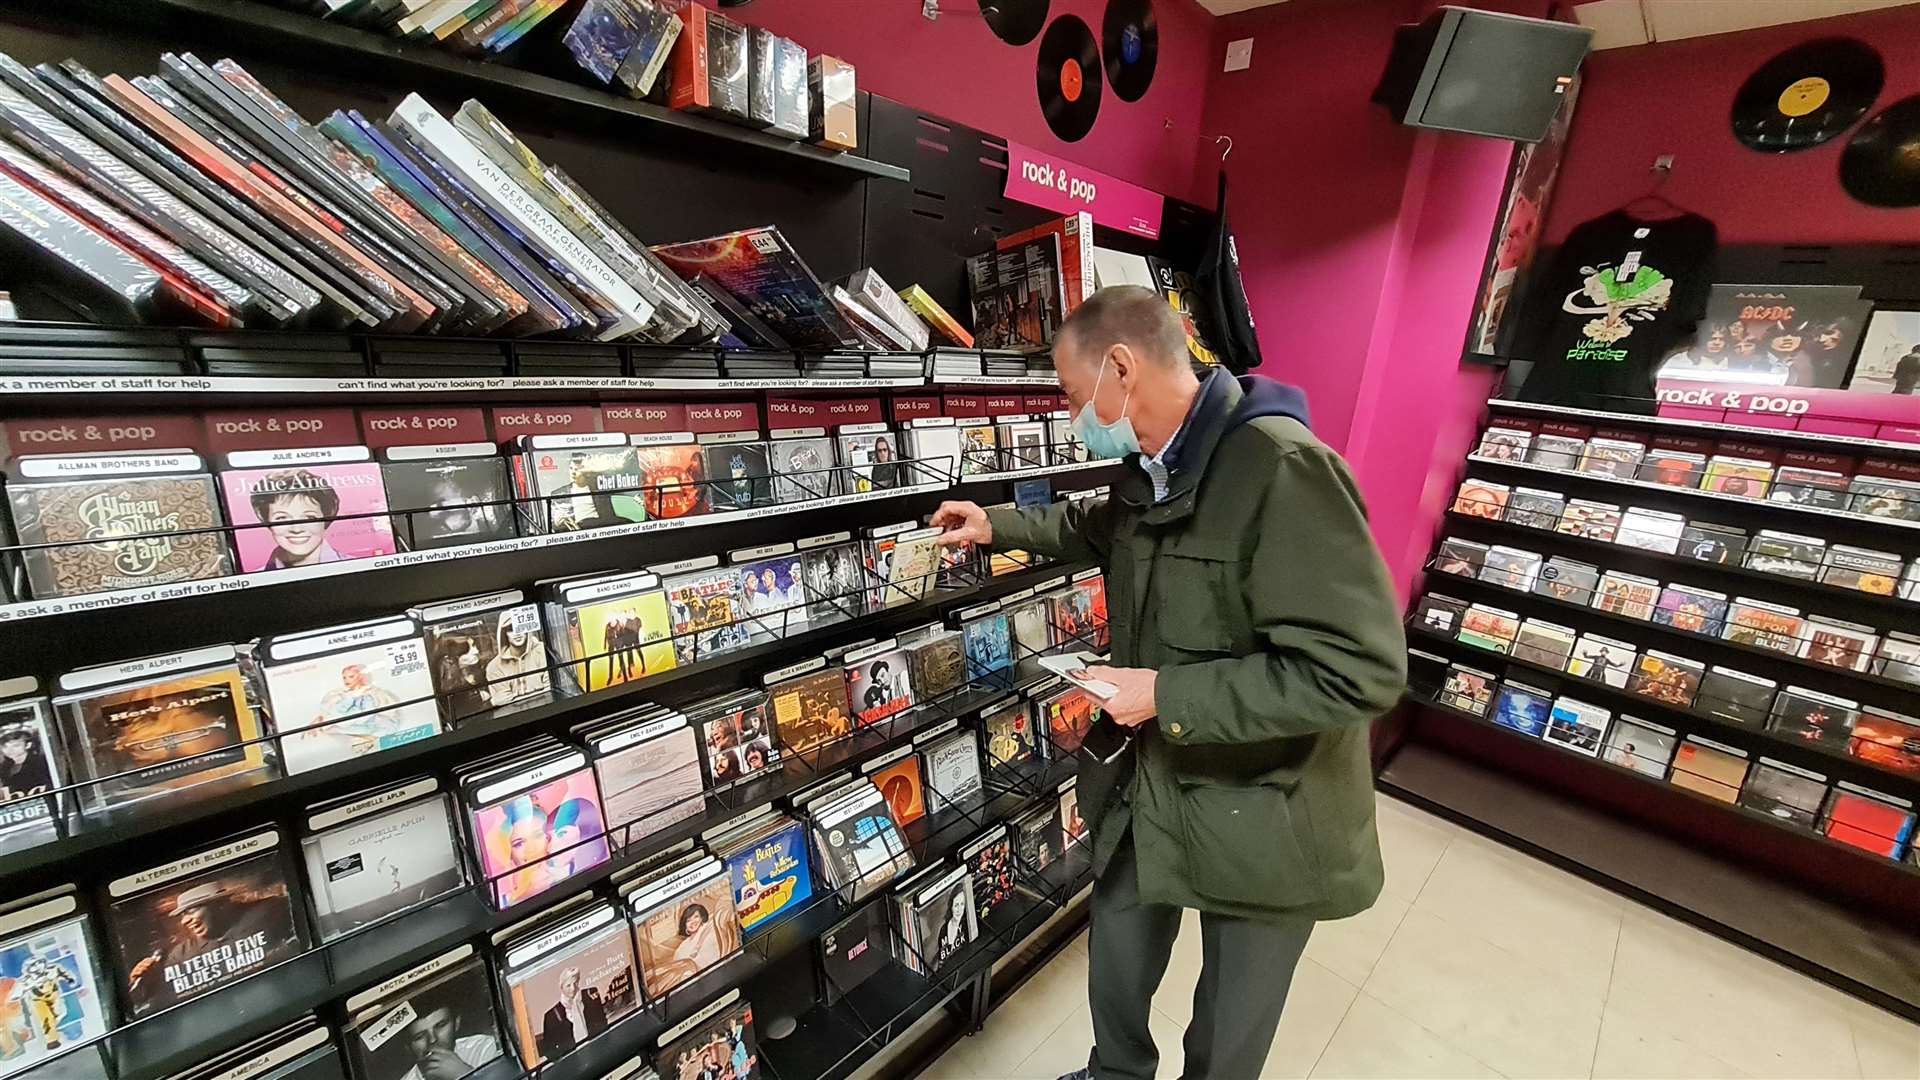 Loyal customer Jim Williams browses the CD selection - he has a collection of about 1,300